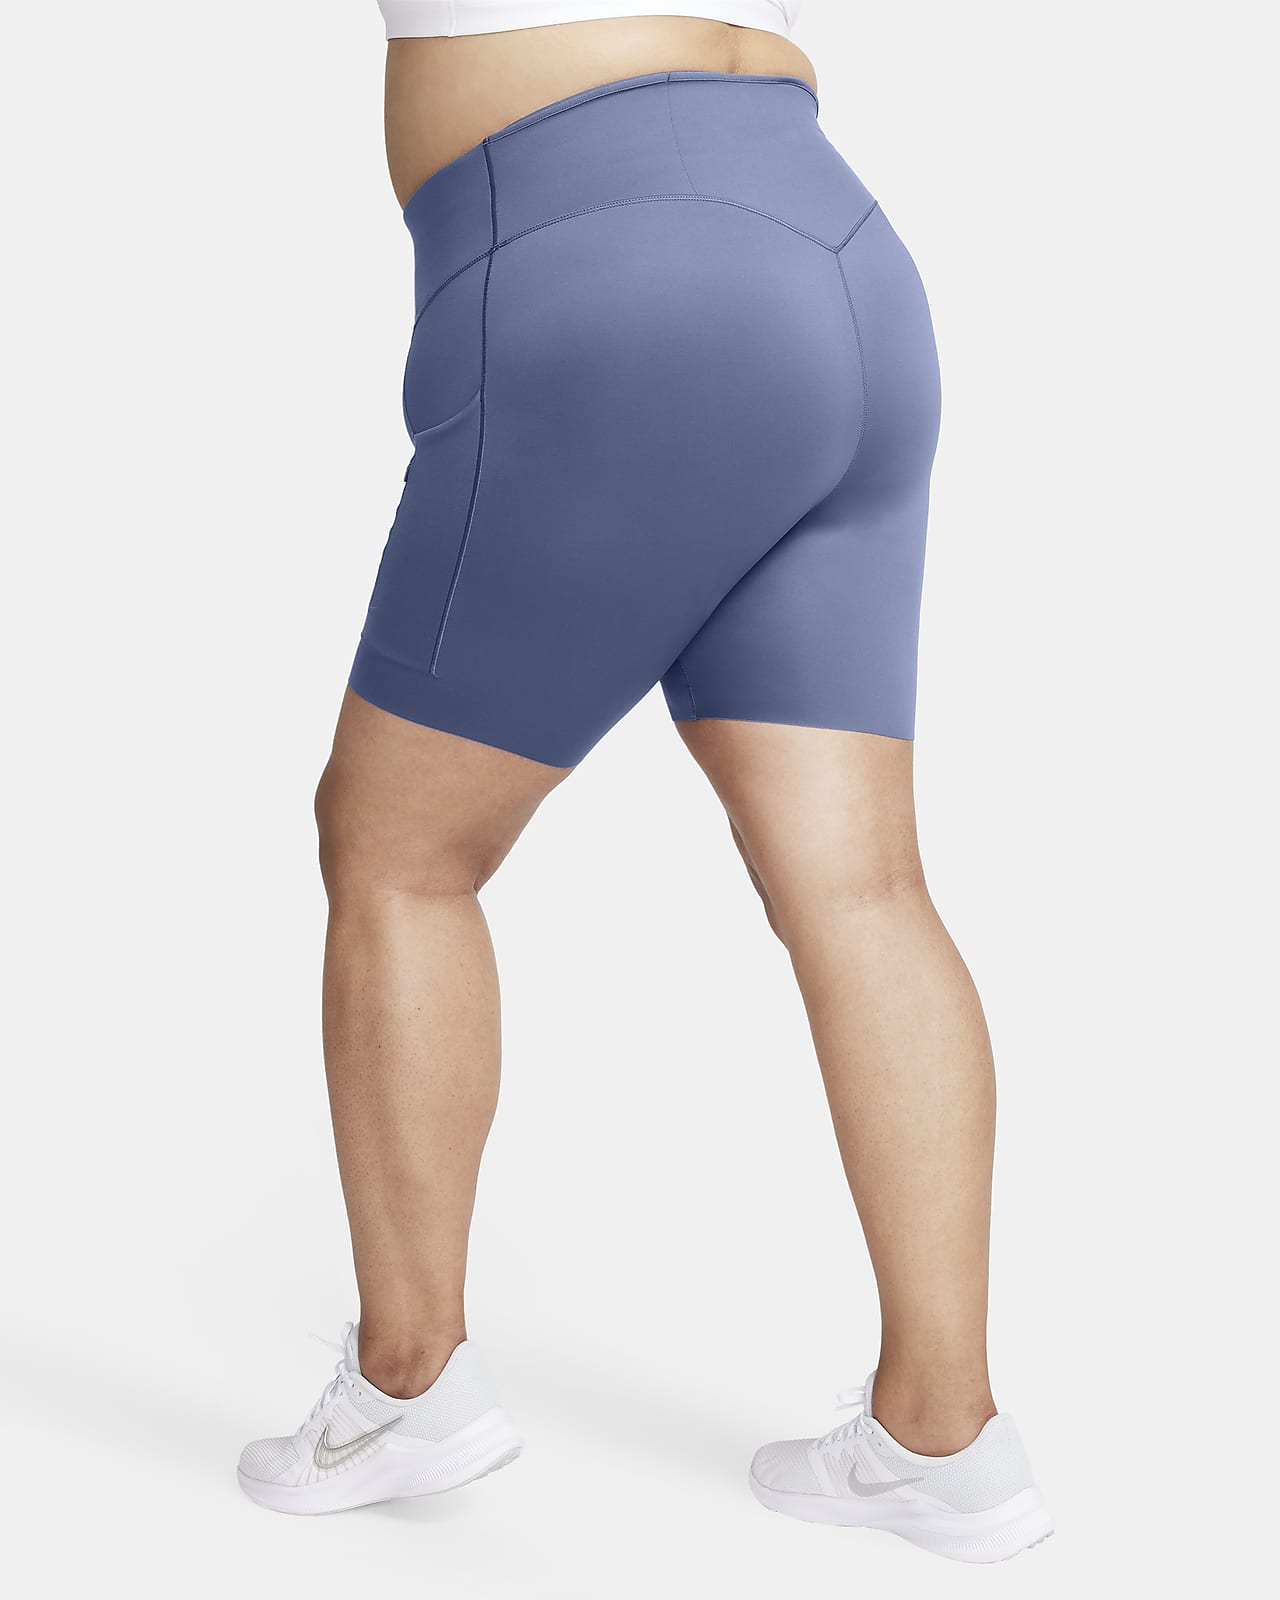 Shop Plus Size Yoga Shorts With Pocket with great discounts and